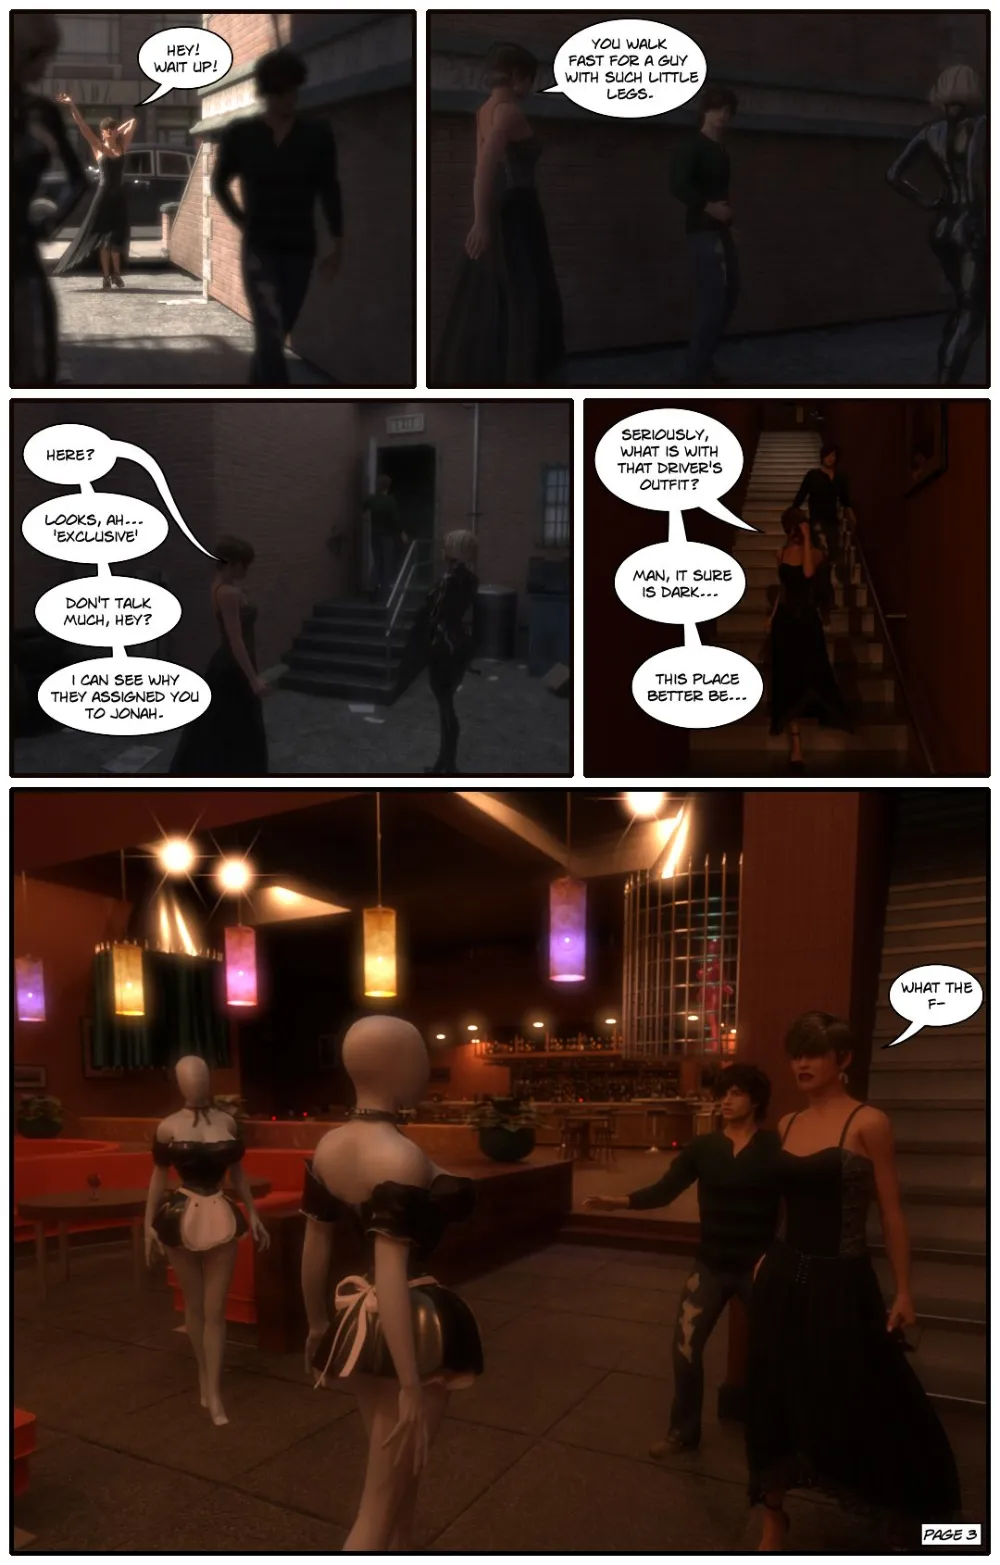 JBovinne- A New Life Together - Page 3